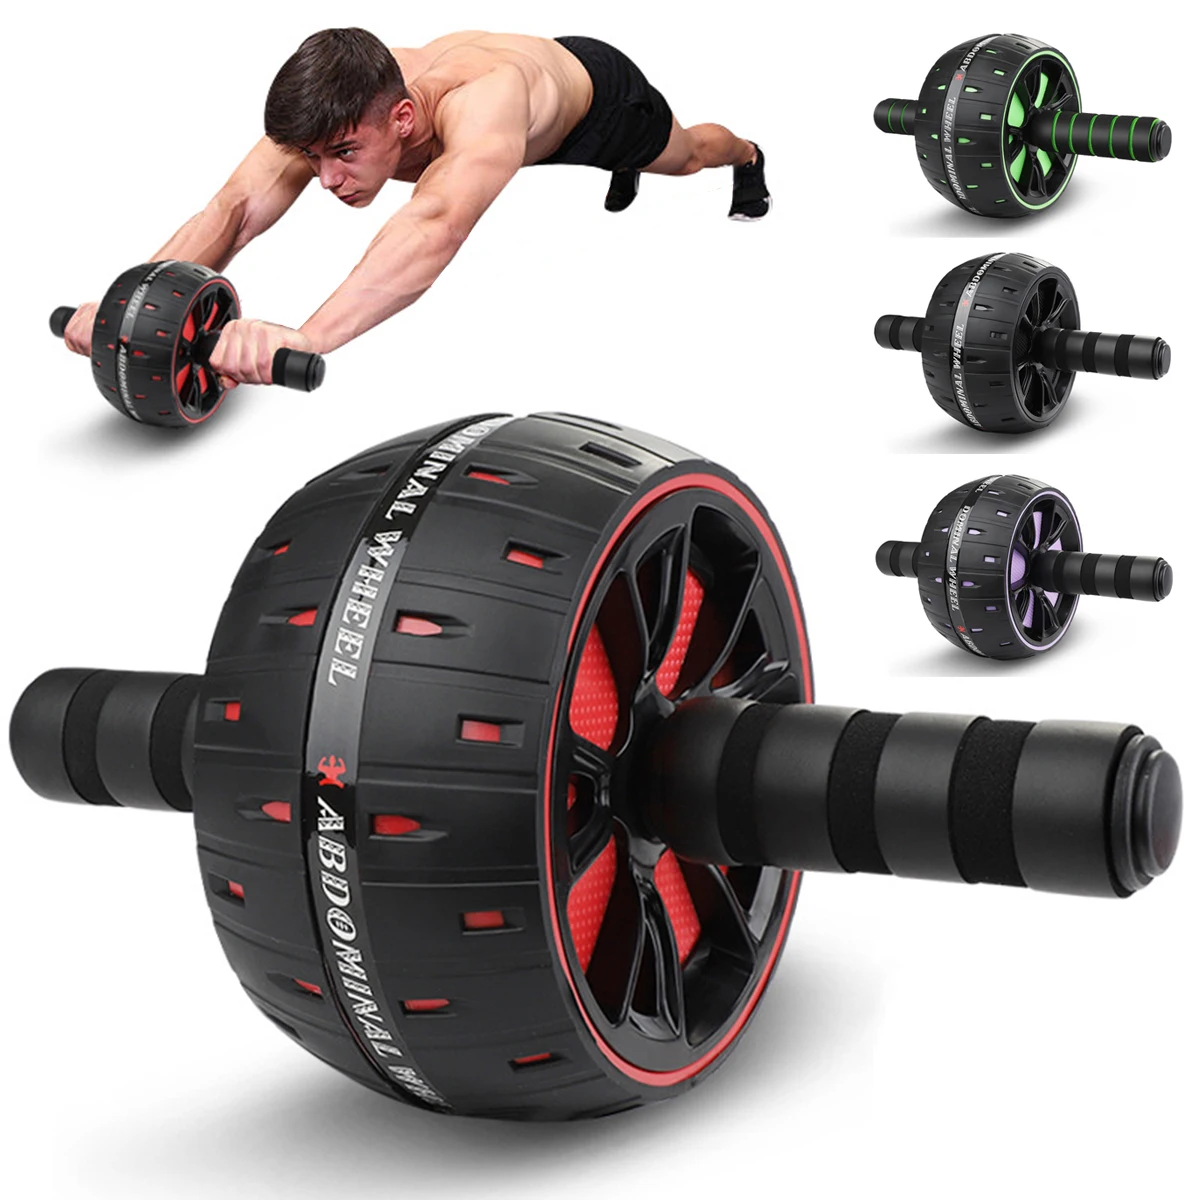 Abs Roller big Wheel Abdominal Muscle Trainer For Fitness No Noise Ab Roller Wheel Workout Abs